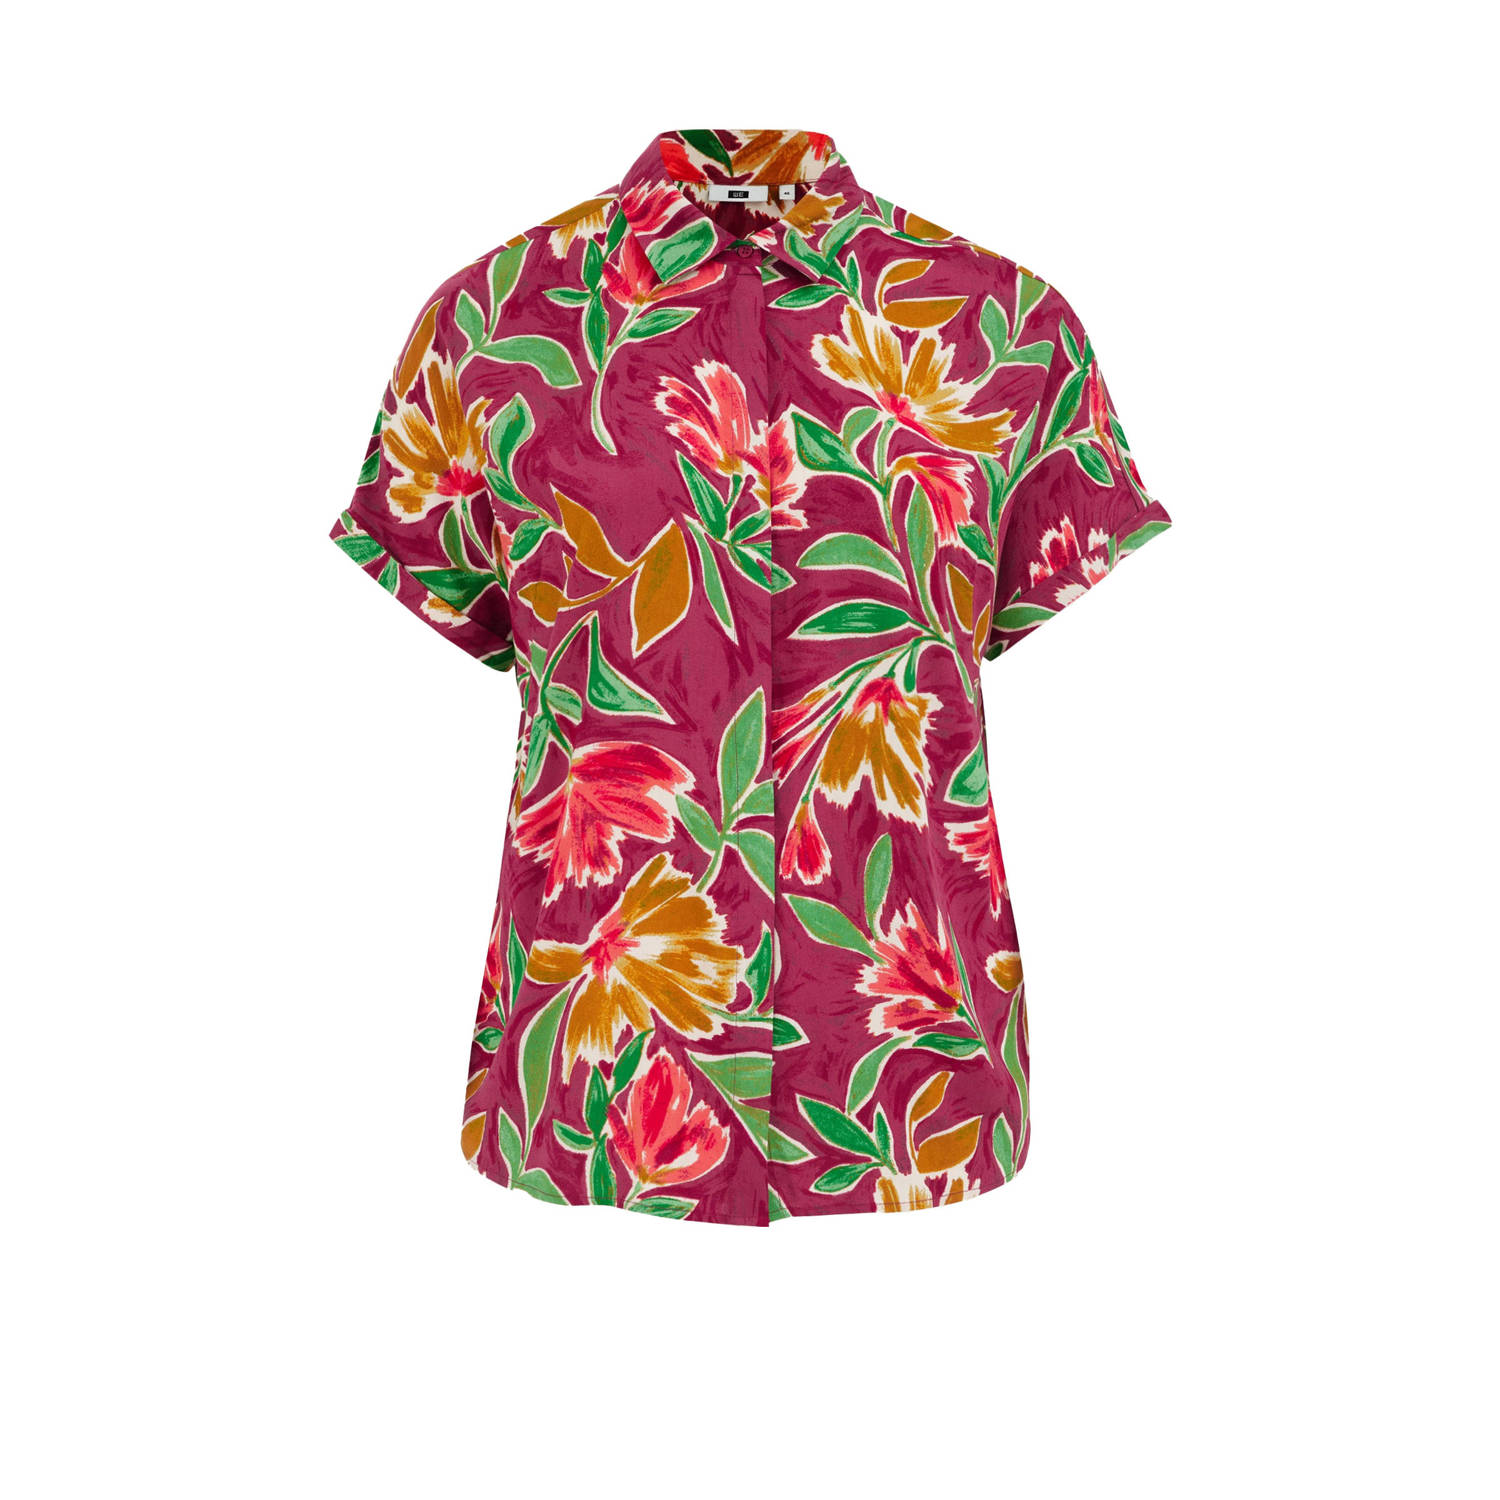 WE Fashion Curve blouse met all over print paars groen oker